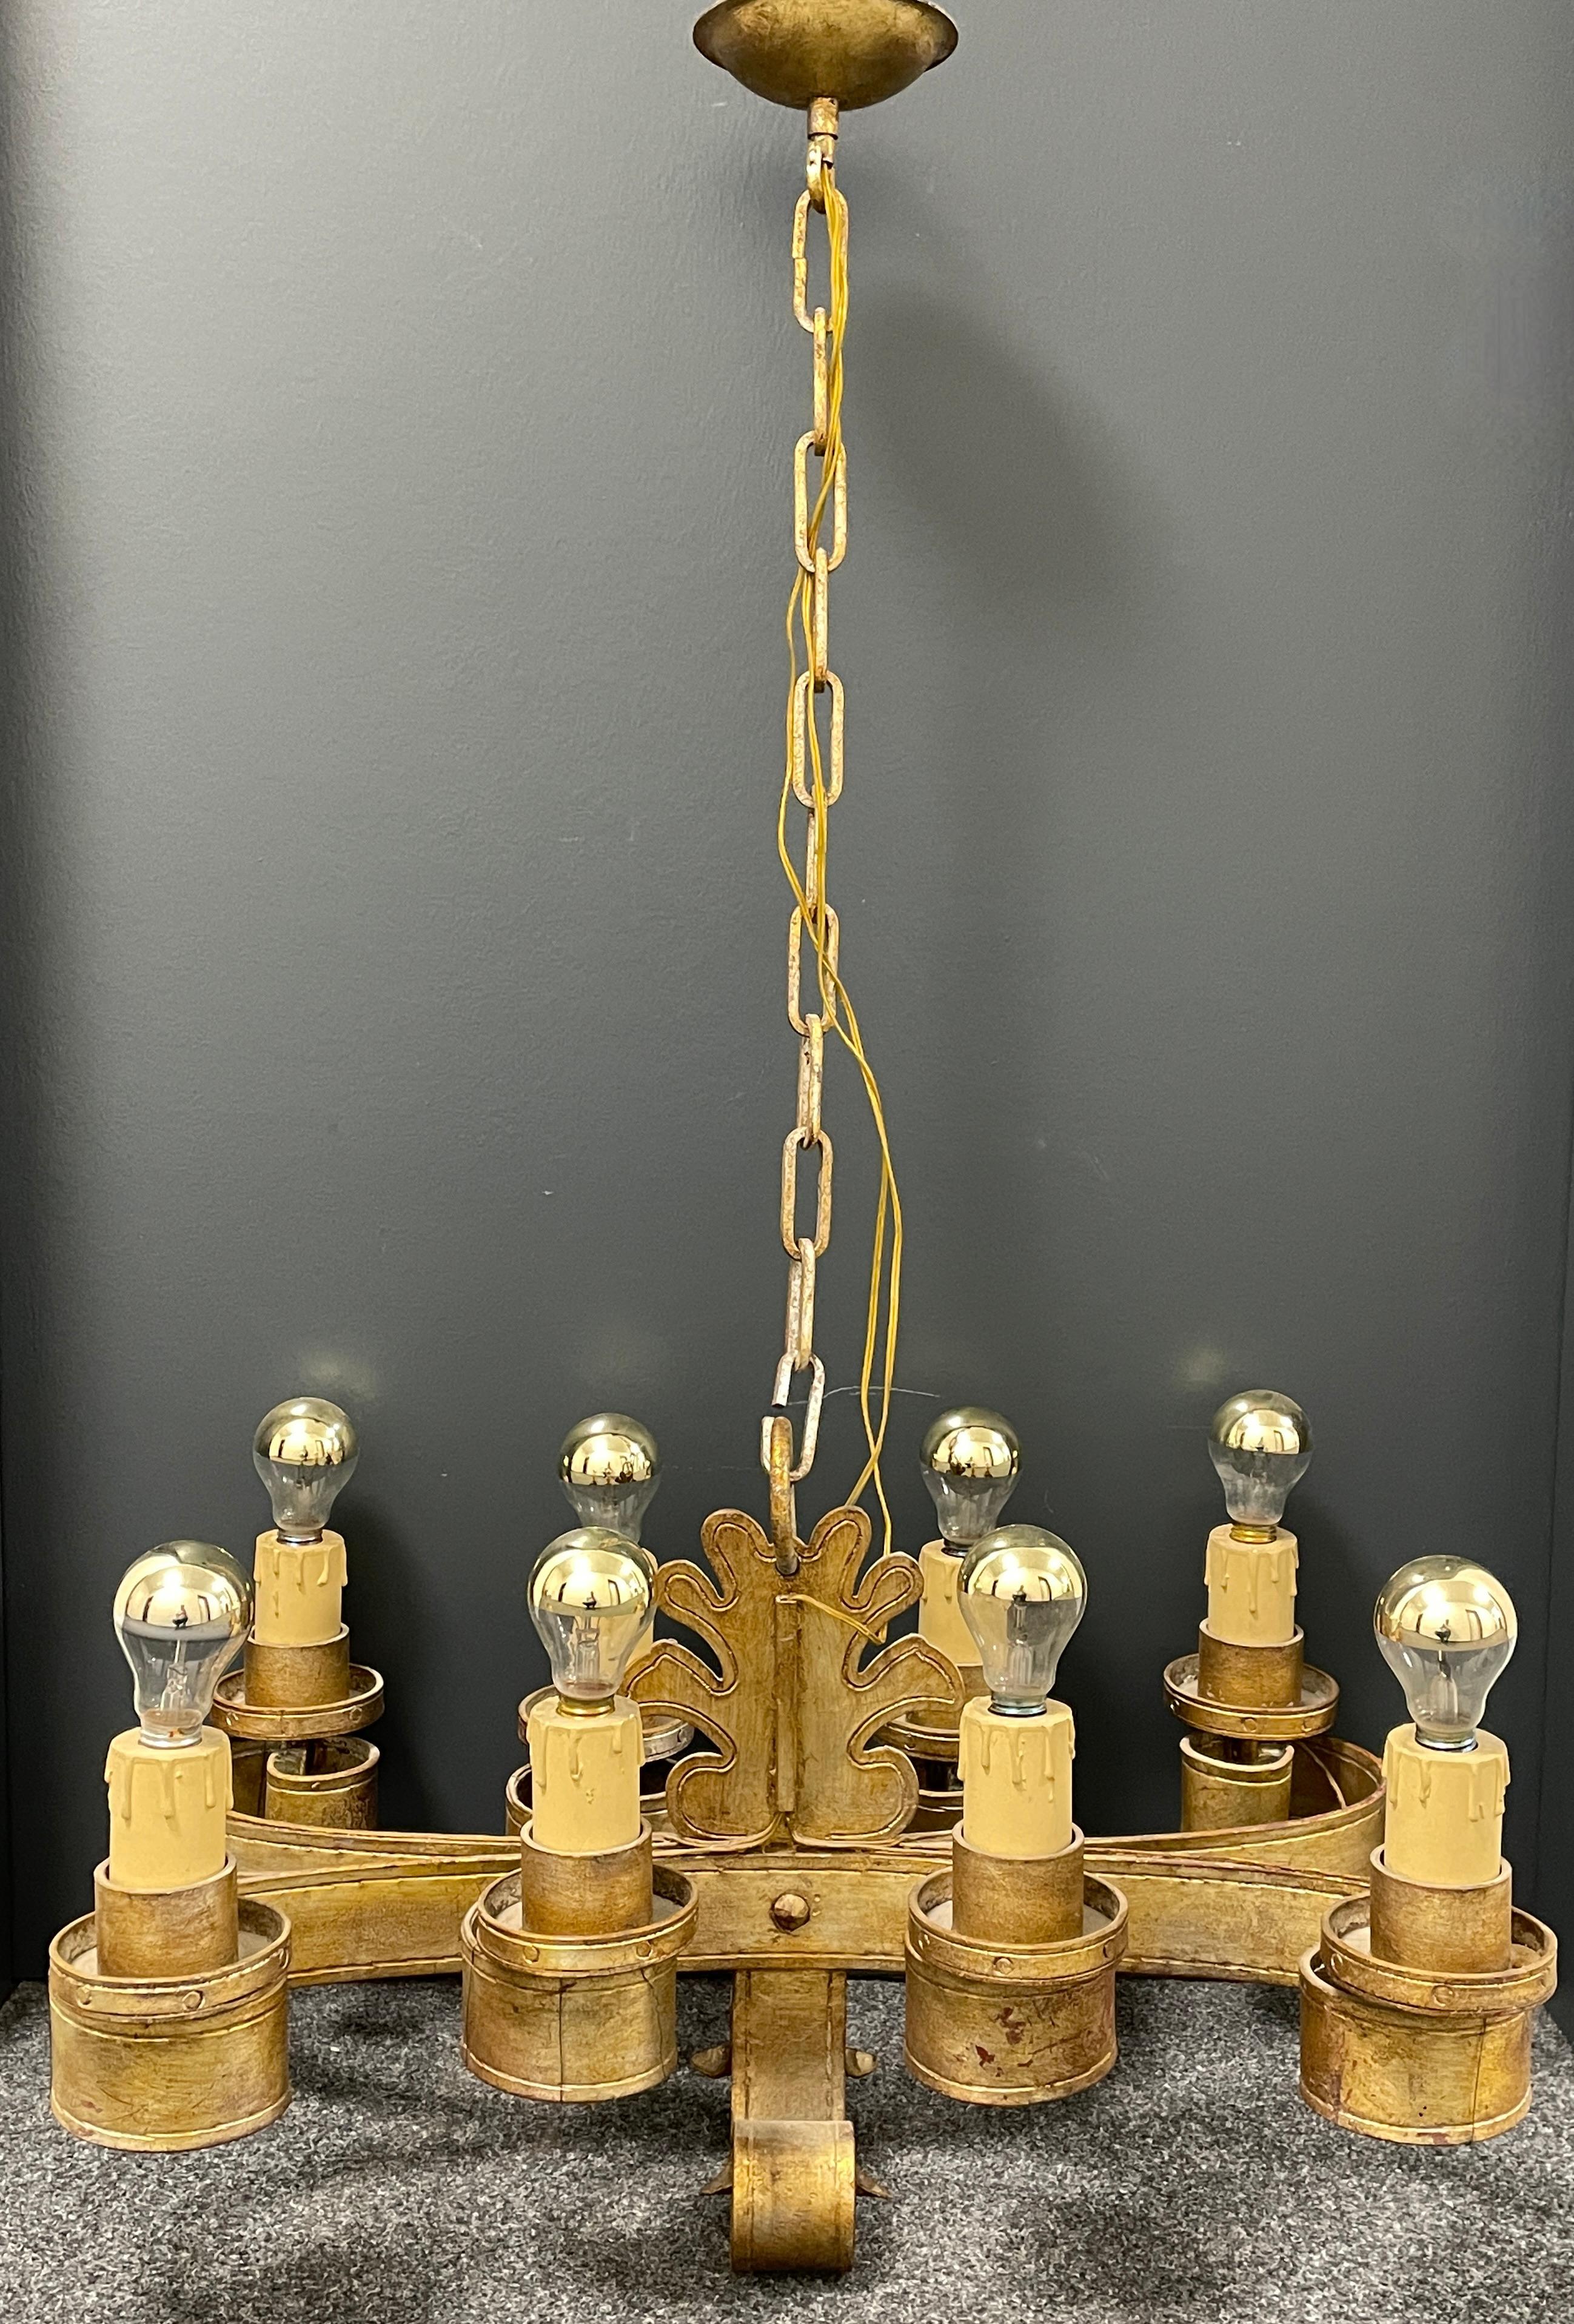 Add a touch of opulence to your home with this charming chandelier! Perfect gilt Iron Metal to enhance any chic or eclectic home. We'd love to see it hanging in an entry hall or in a Living / Dinning room area. Built in the 1960s, this chandelier